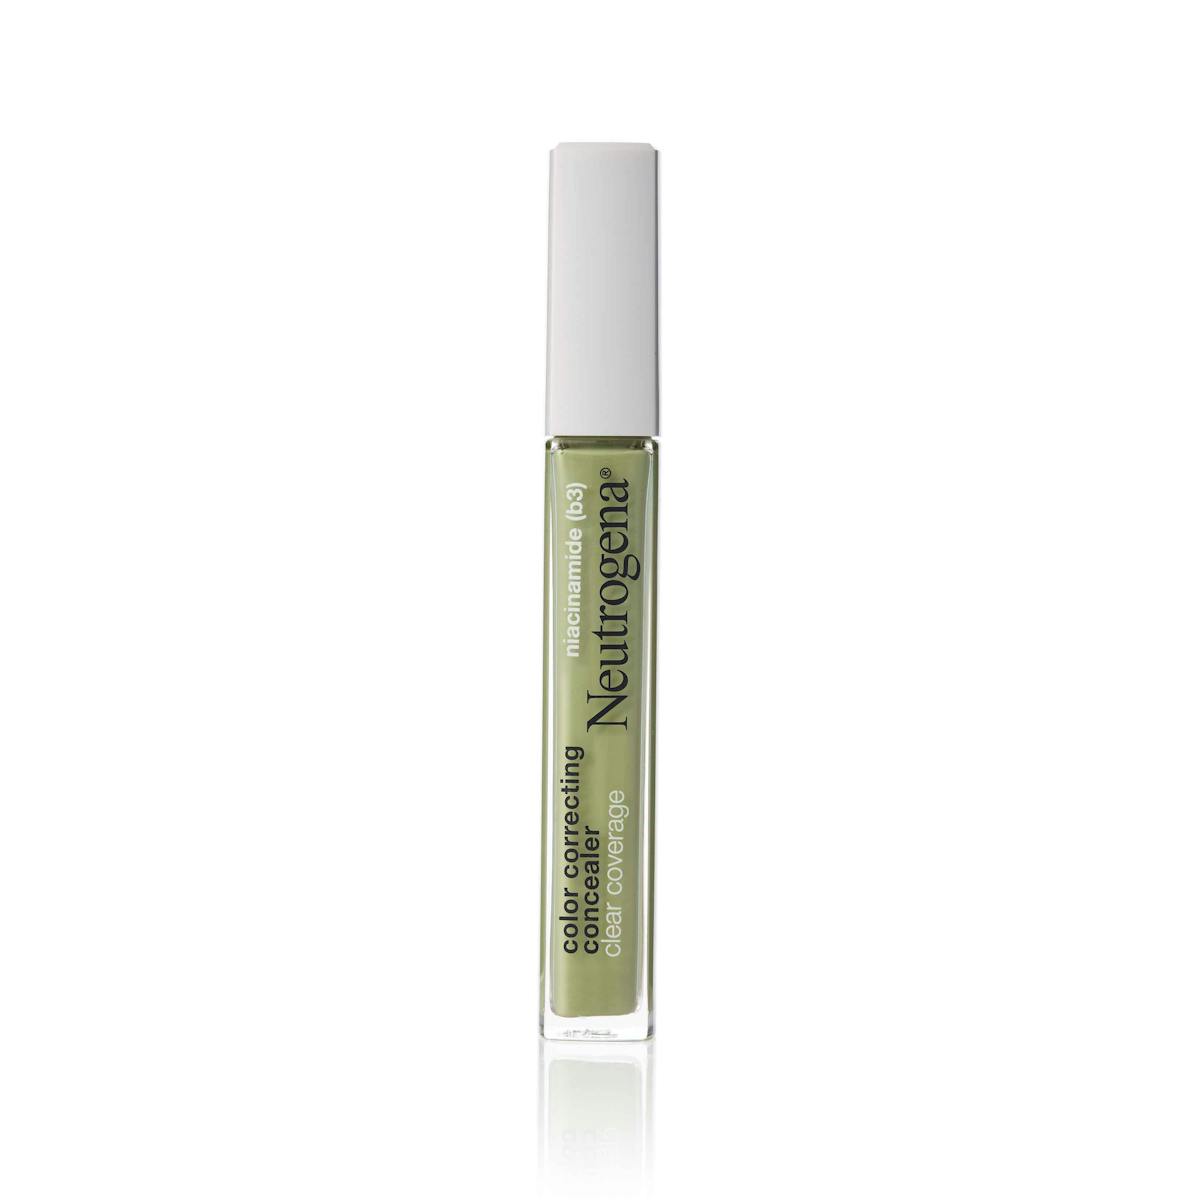 https://ntg-catalog.imgix.net/products/6816007CC_Concealer_01-green.jpg?fm=jpg&auto=format&w=1200&h=1443&fit=crop